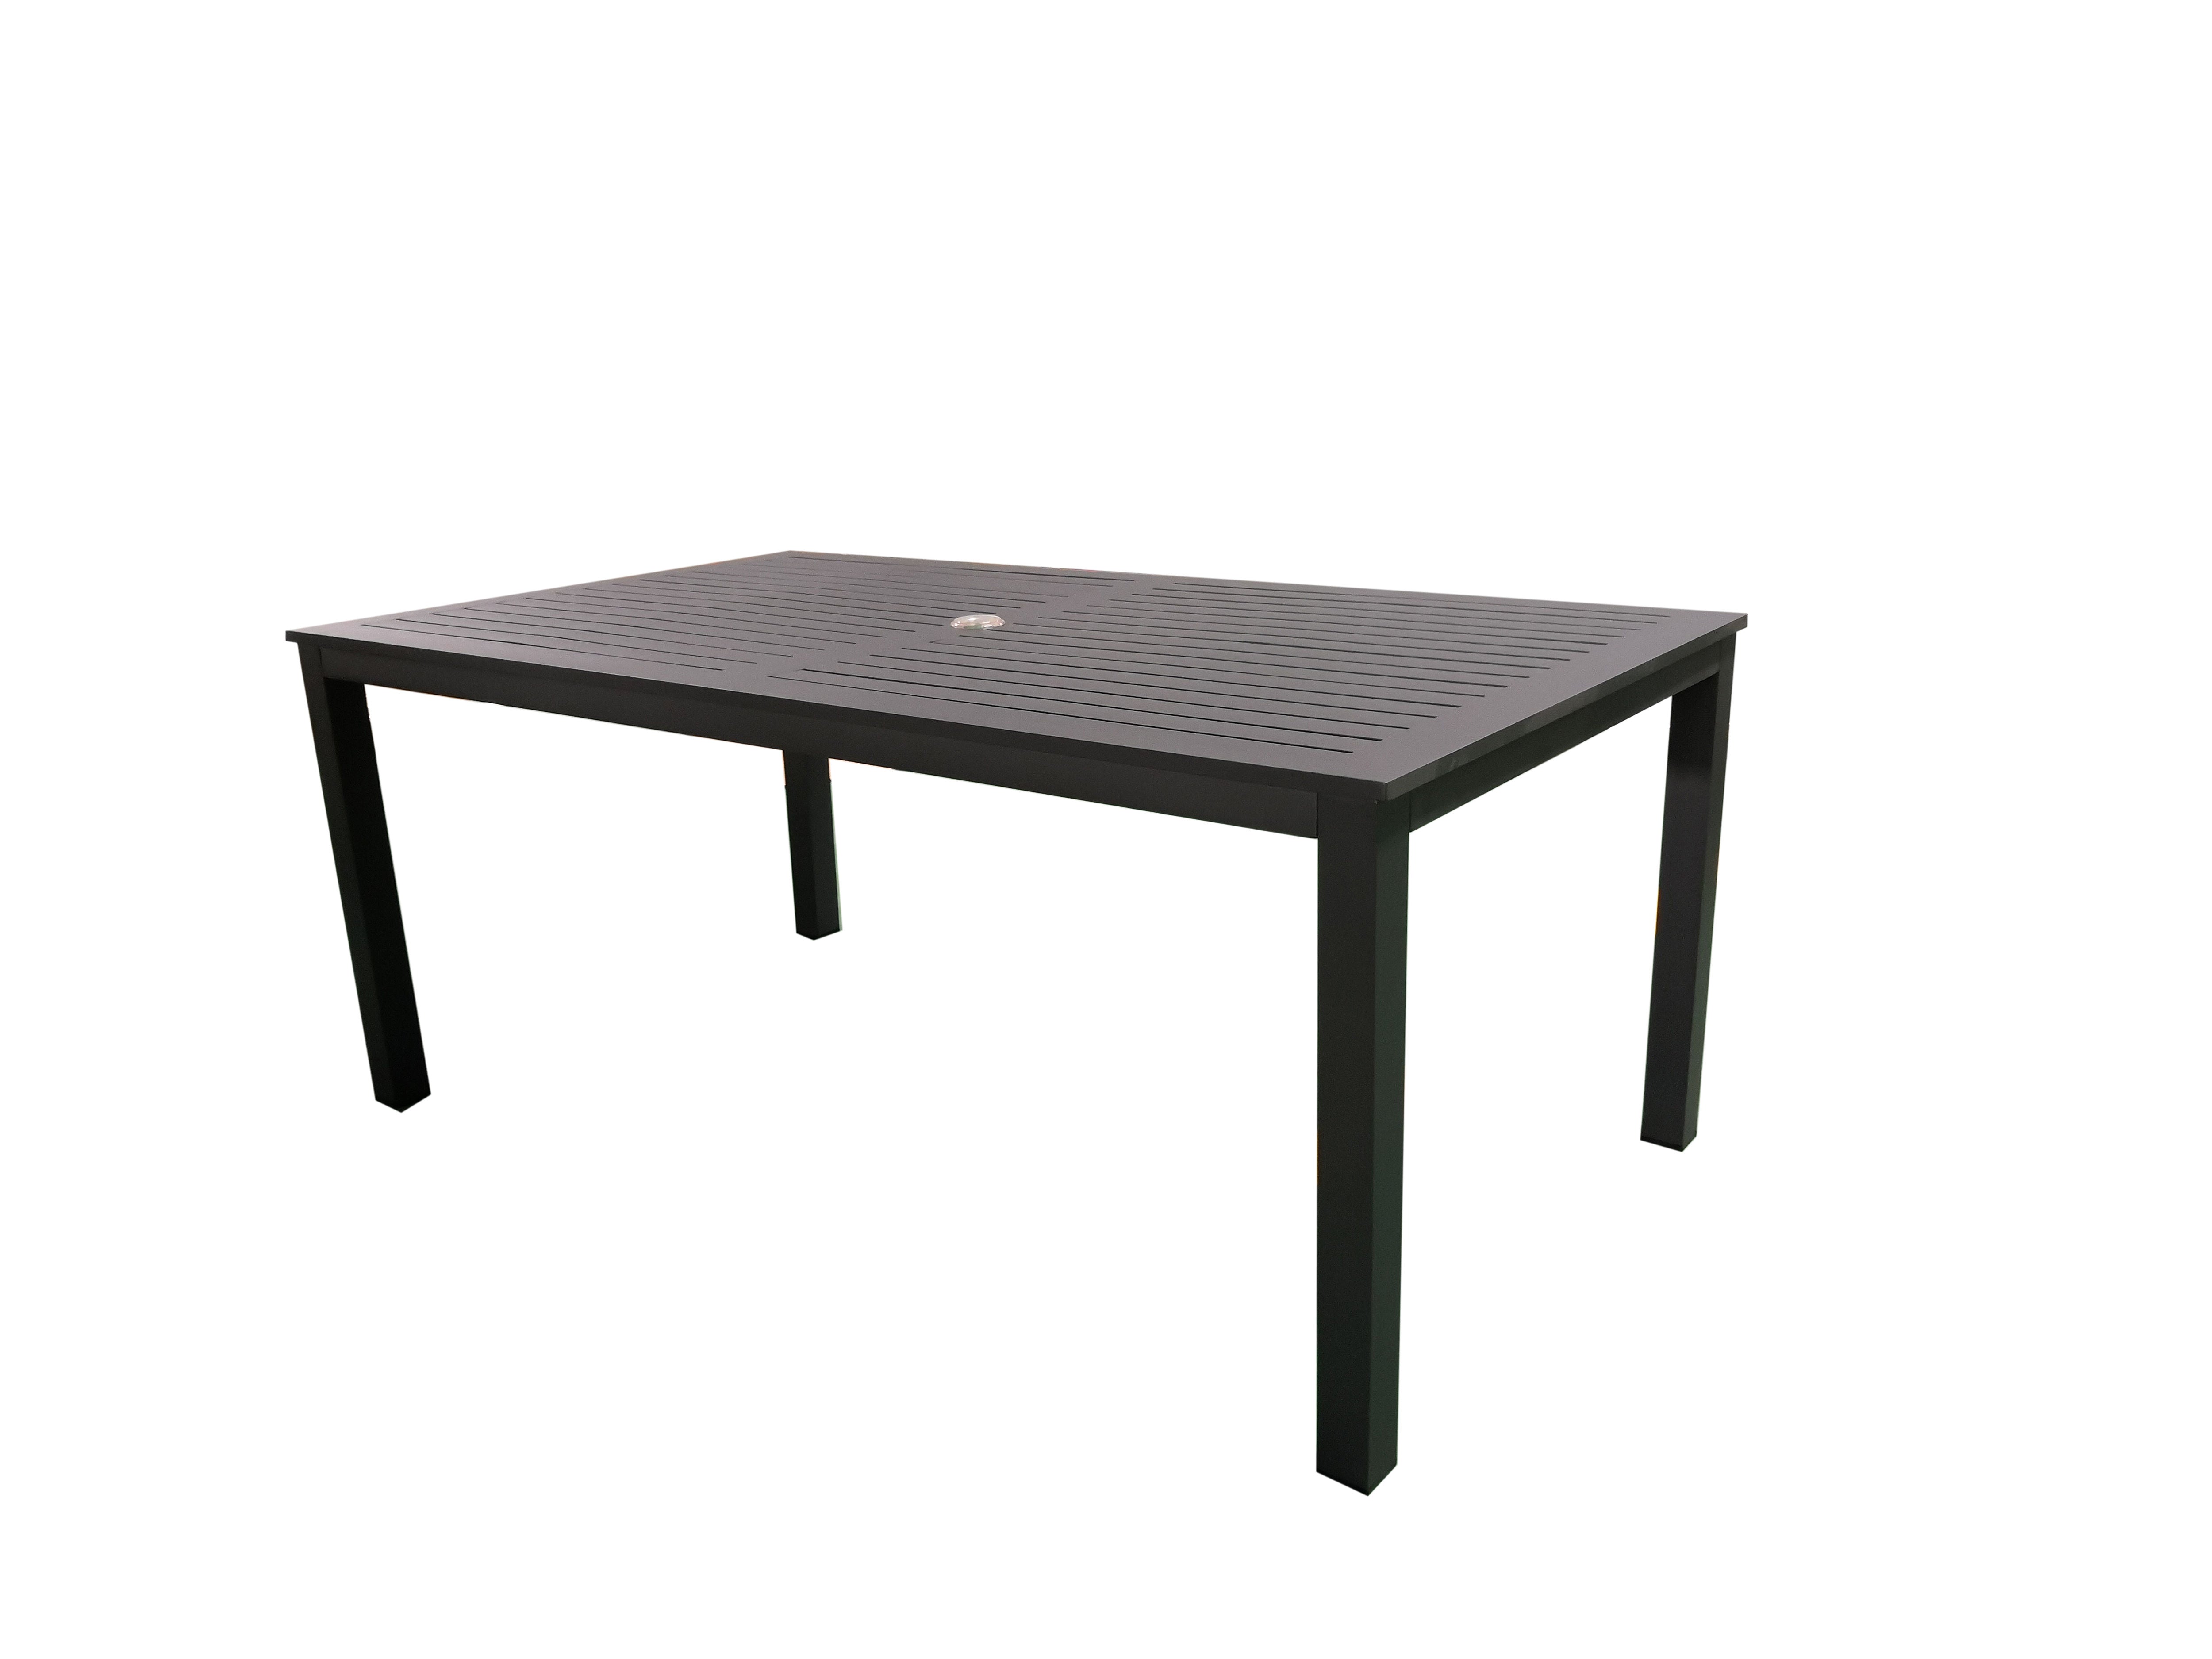 PatioZone Dining Table with Slated Tabletop w/Umbrella Hole in Middle and Aluminum Frame (MOSS-T304C) - Matte Charcoal